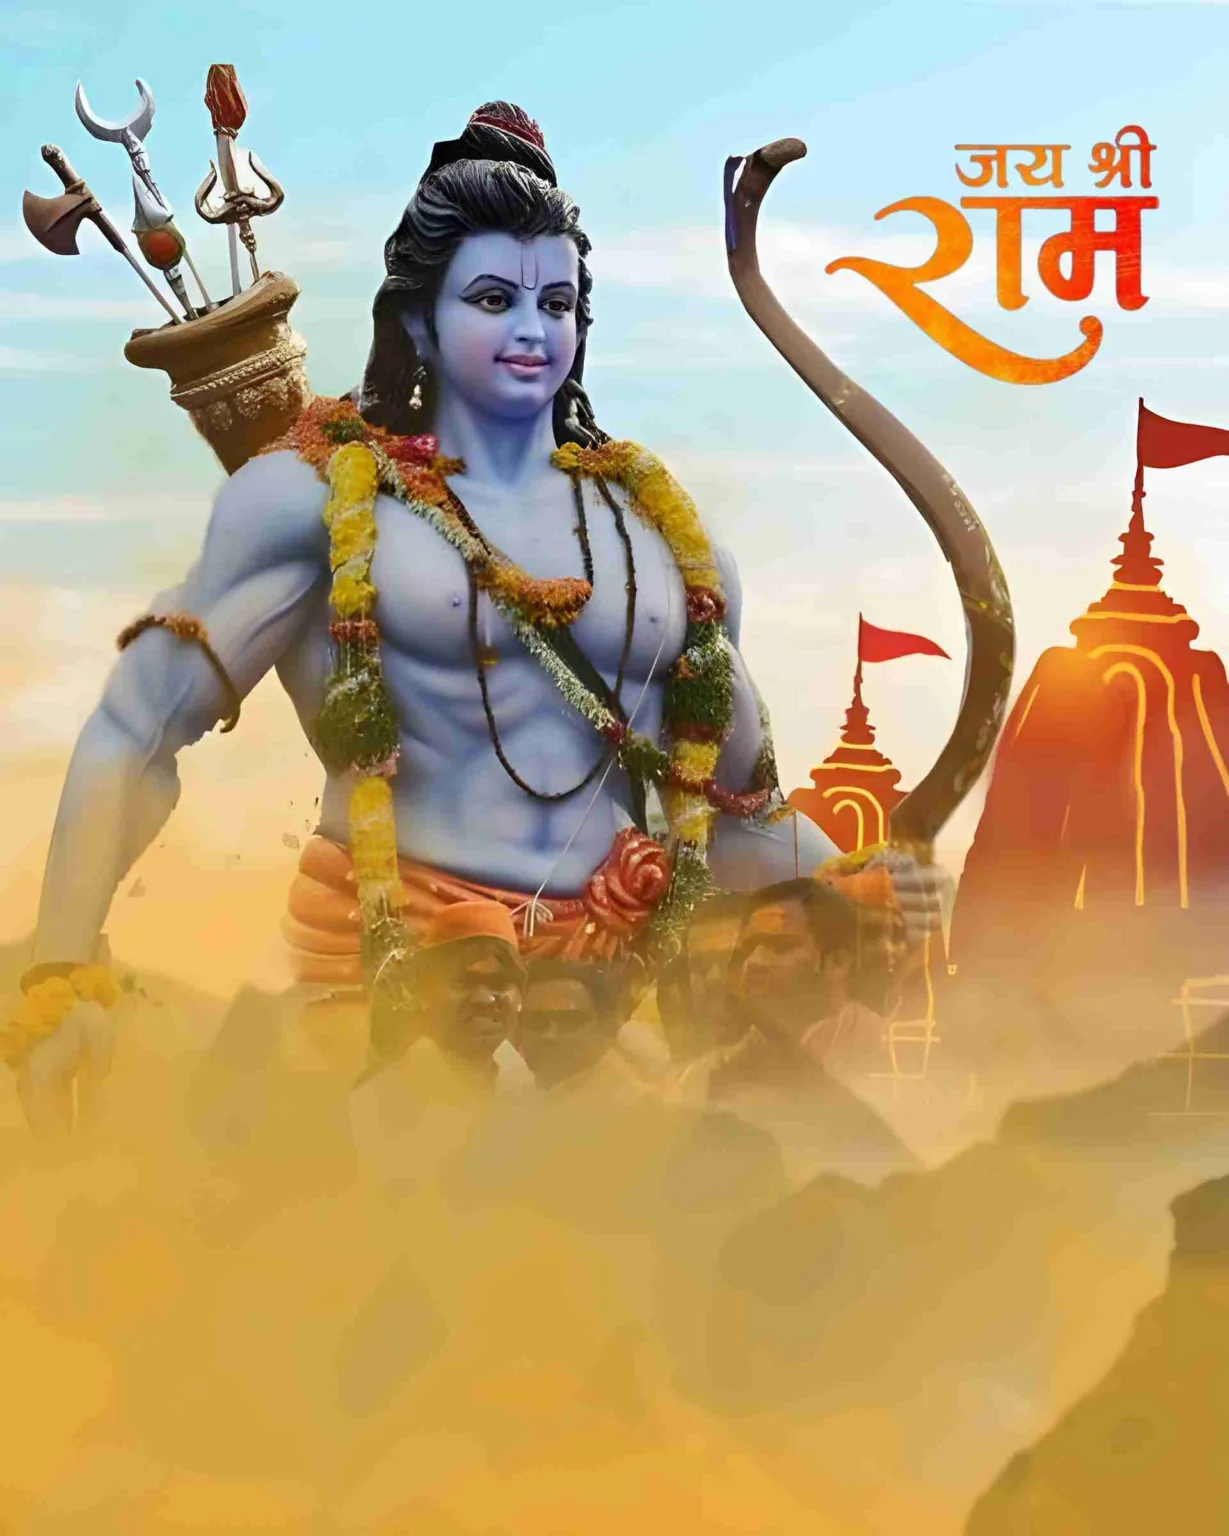 Lord Shree Ram Background Image for Editing